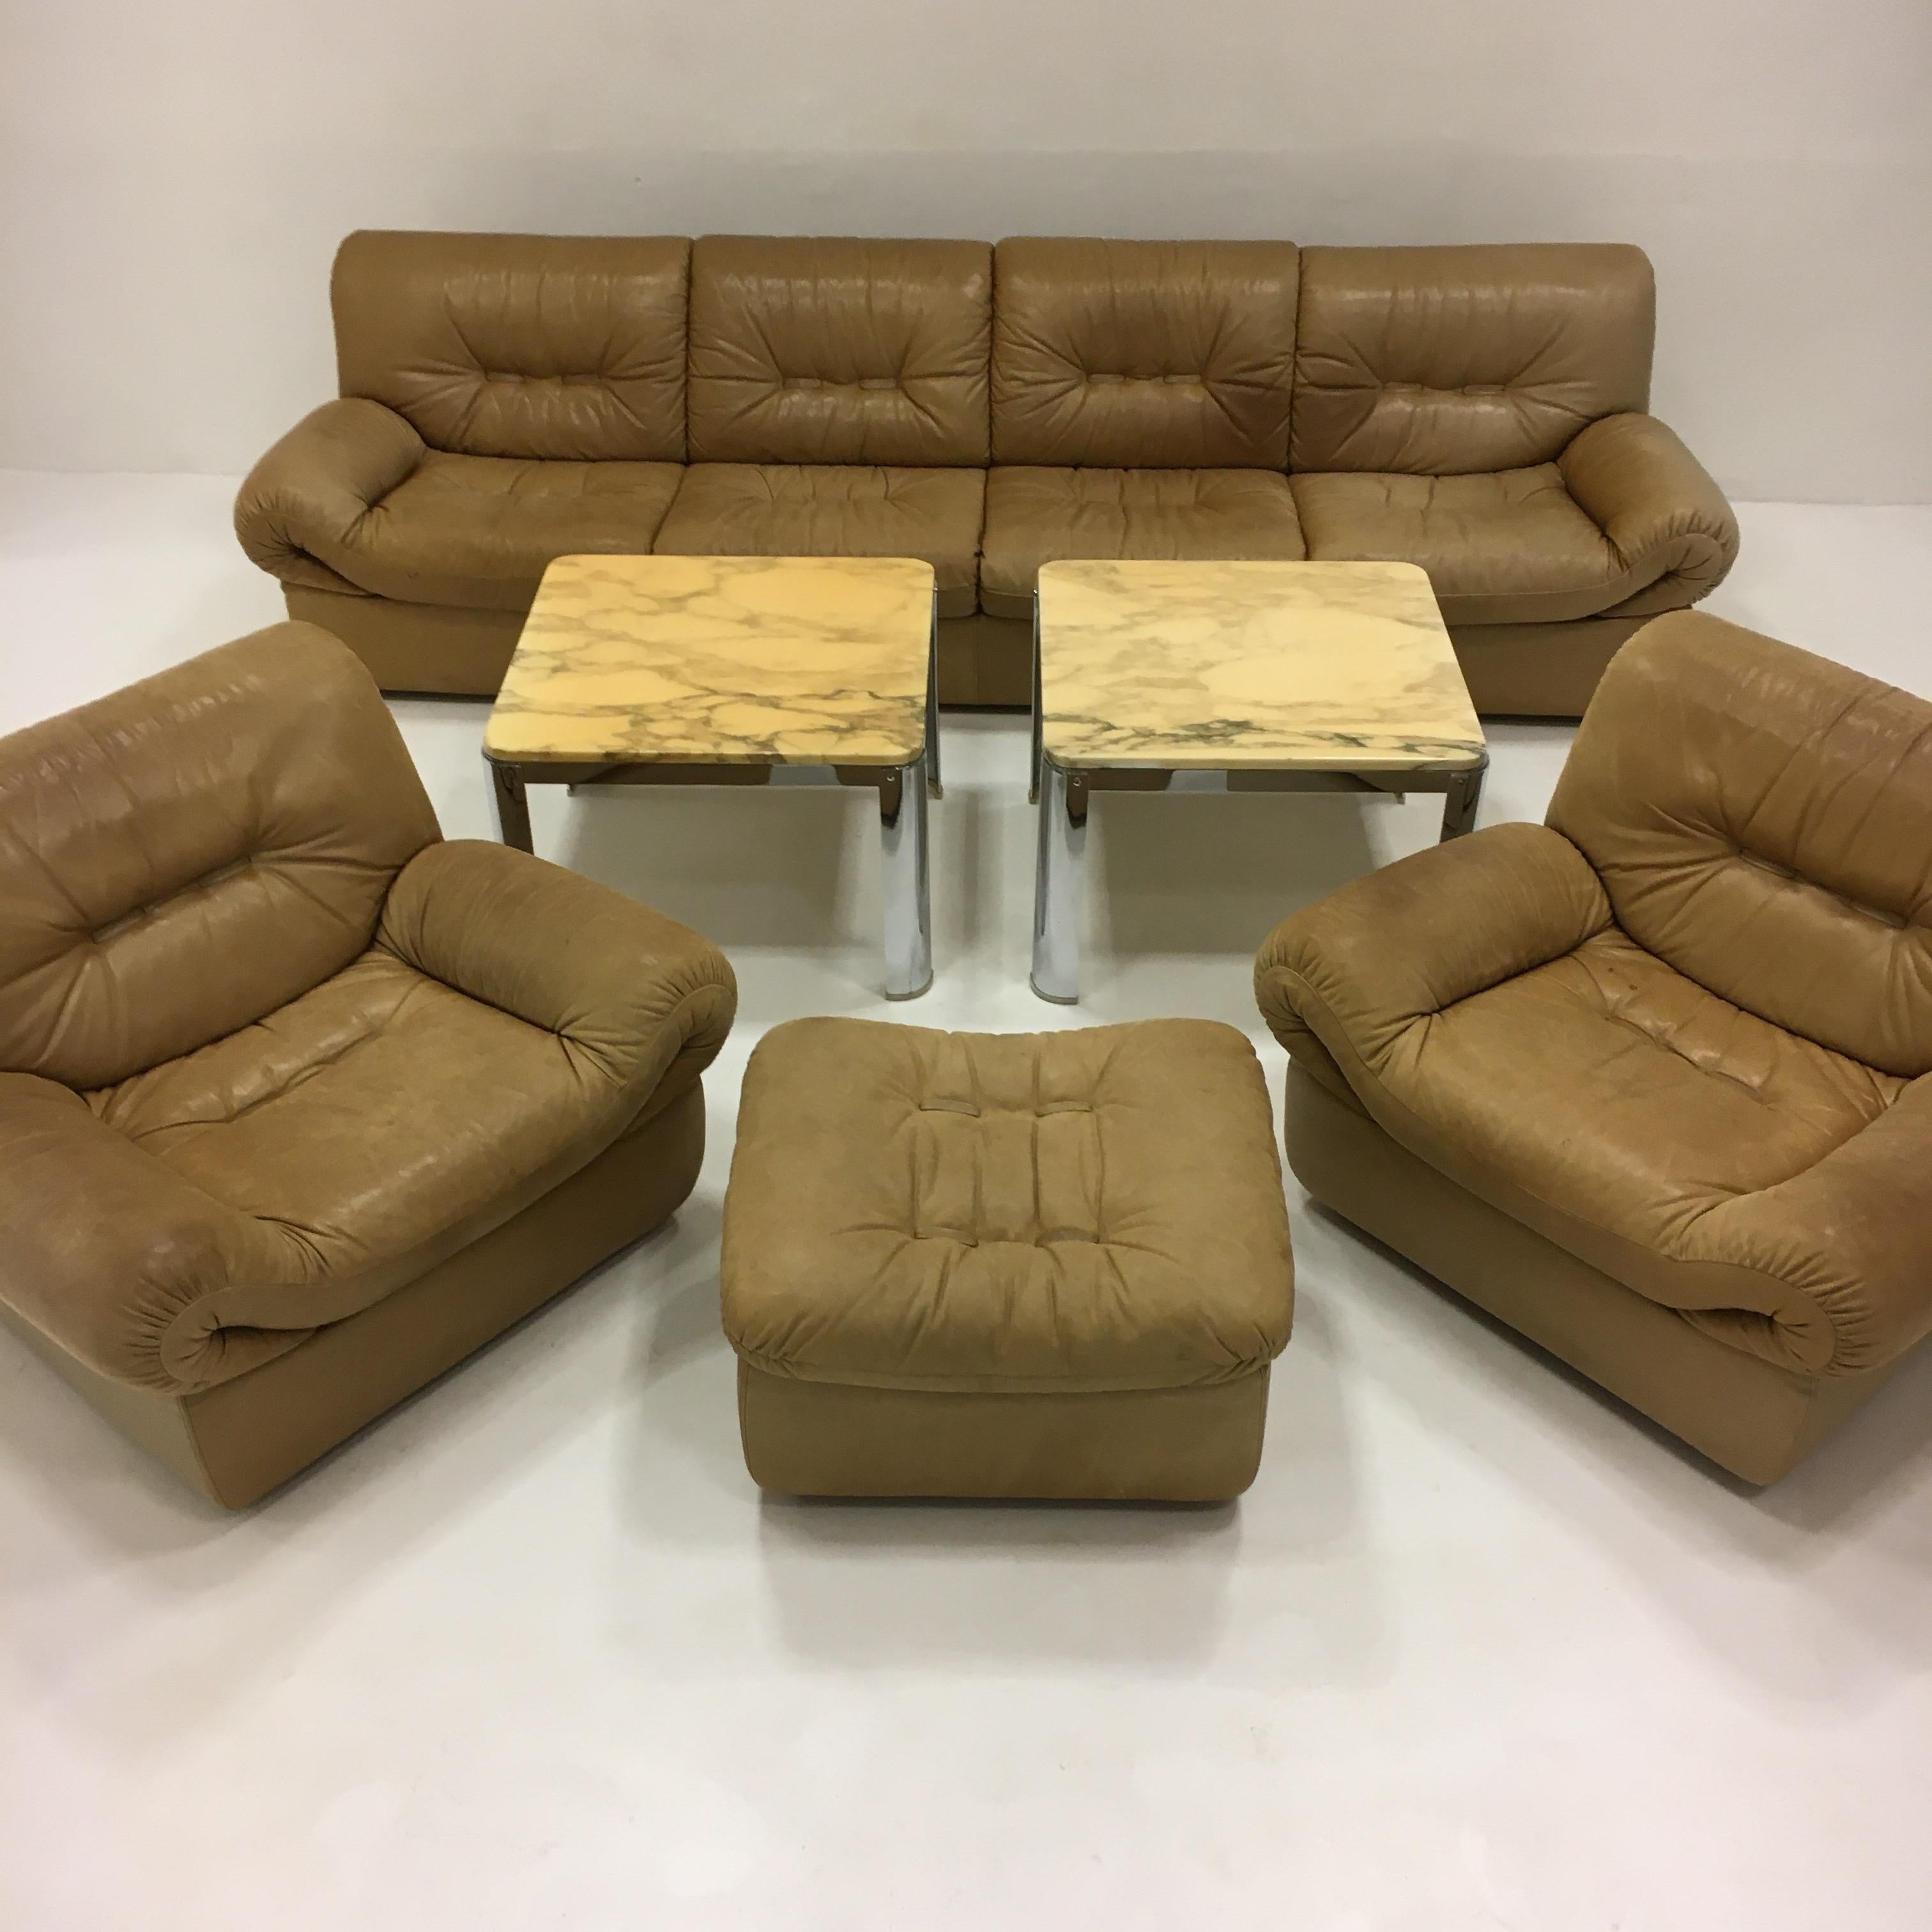 Wittmann, model 'Chairman' sofa suite living room set, patinated leather, 1971.